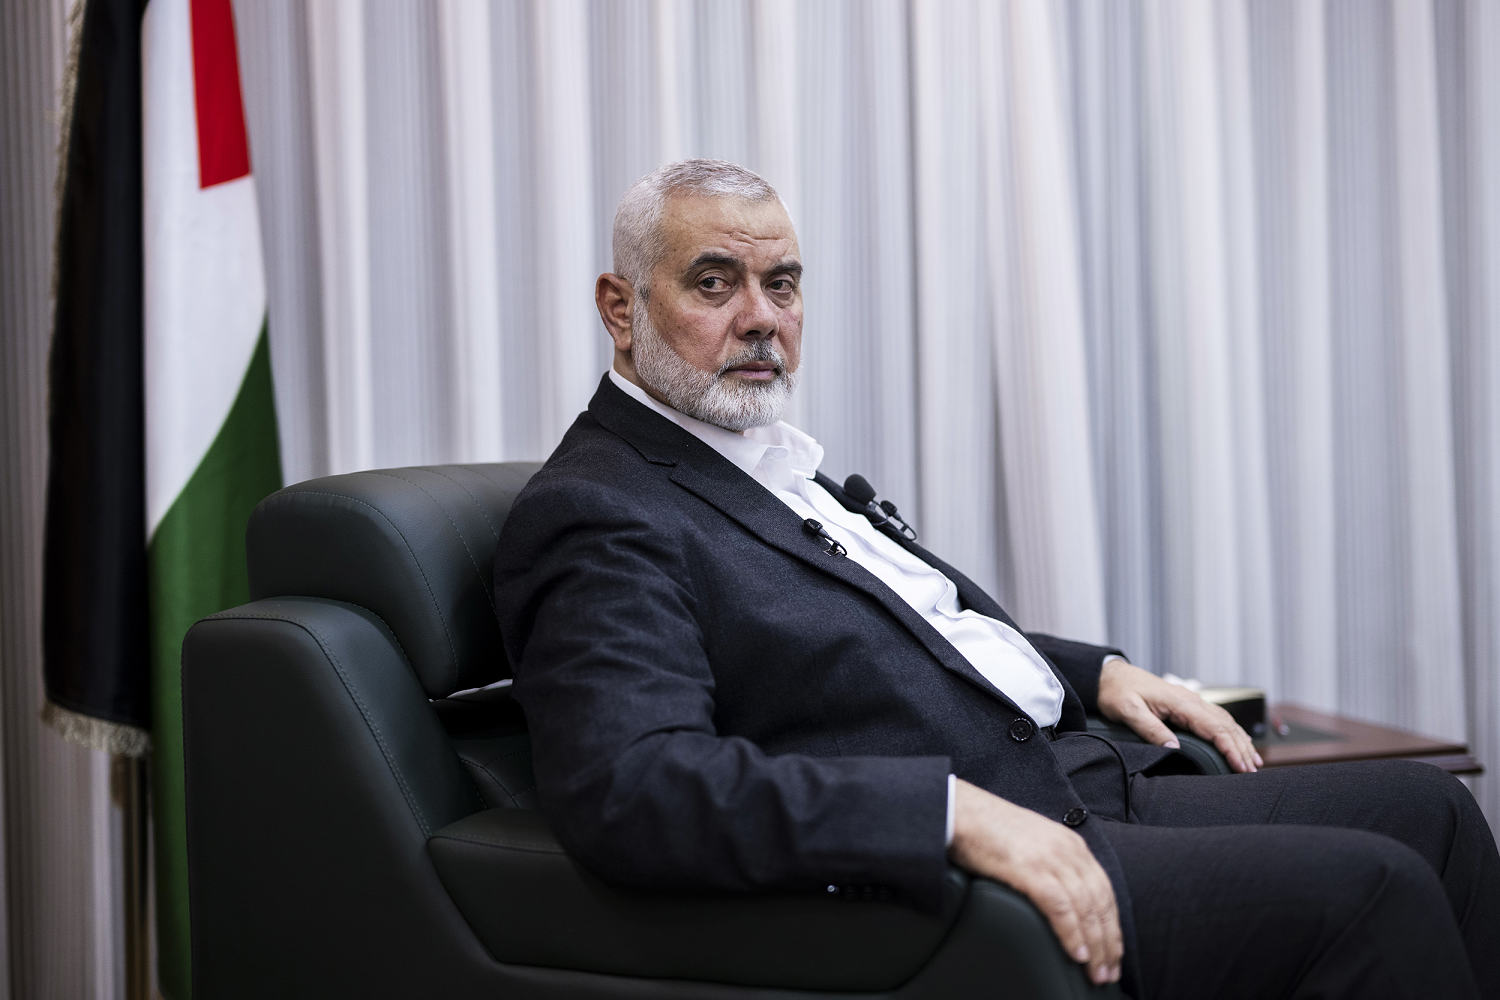 The Biden admin is likely planning for worst case scenario after a Hamas leader's killing